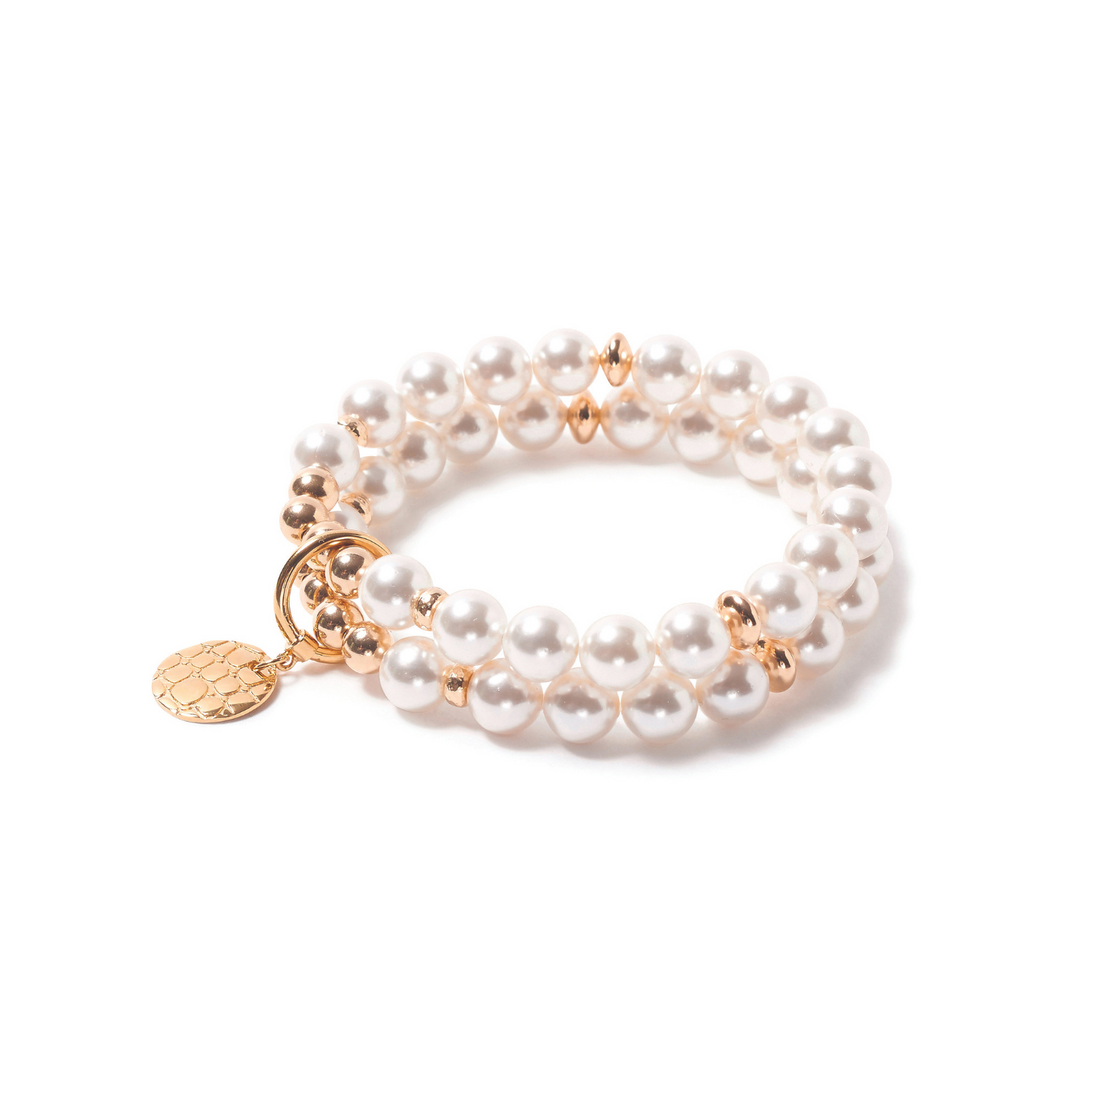 be luminous women's bracelet mother-of-pearl sterling silver 14kt gold vermeil handcrafted in canada  